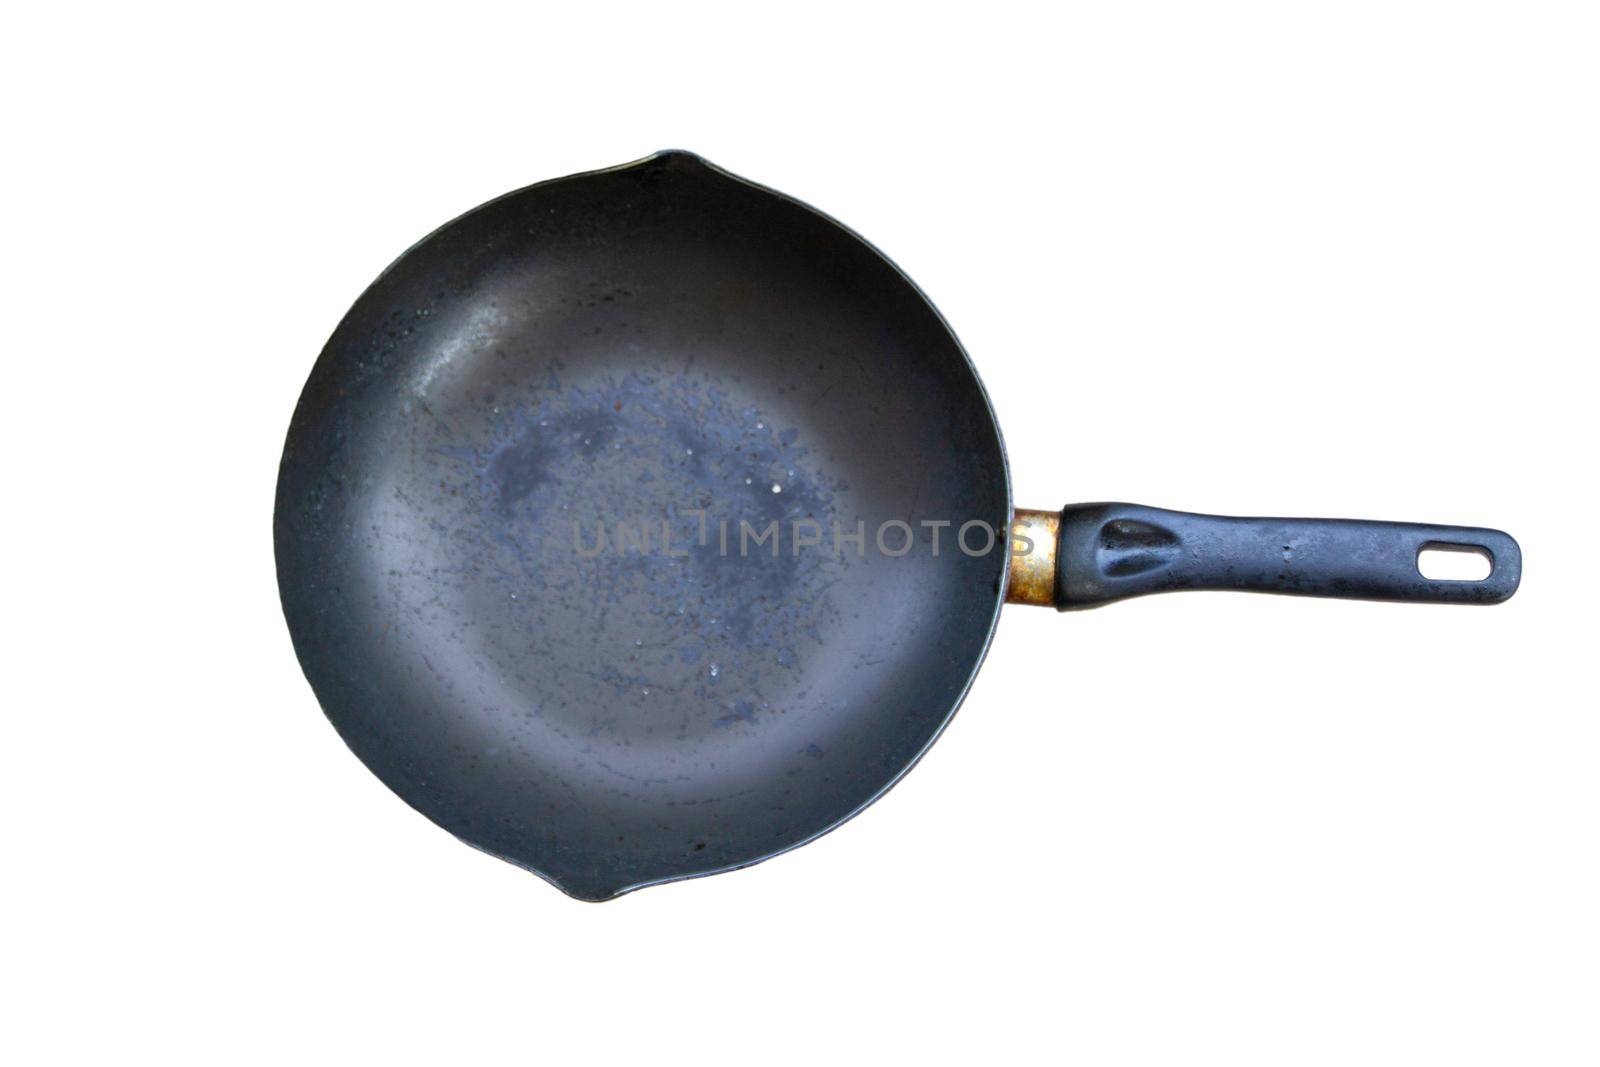 old black pan There are yellow stains on the handle. isolated on a white background by pichai25